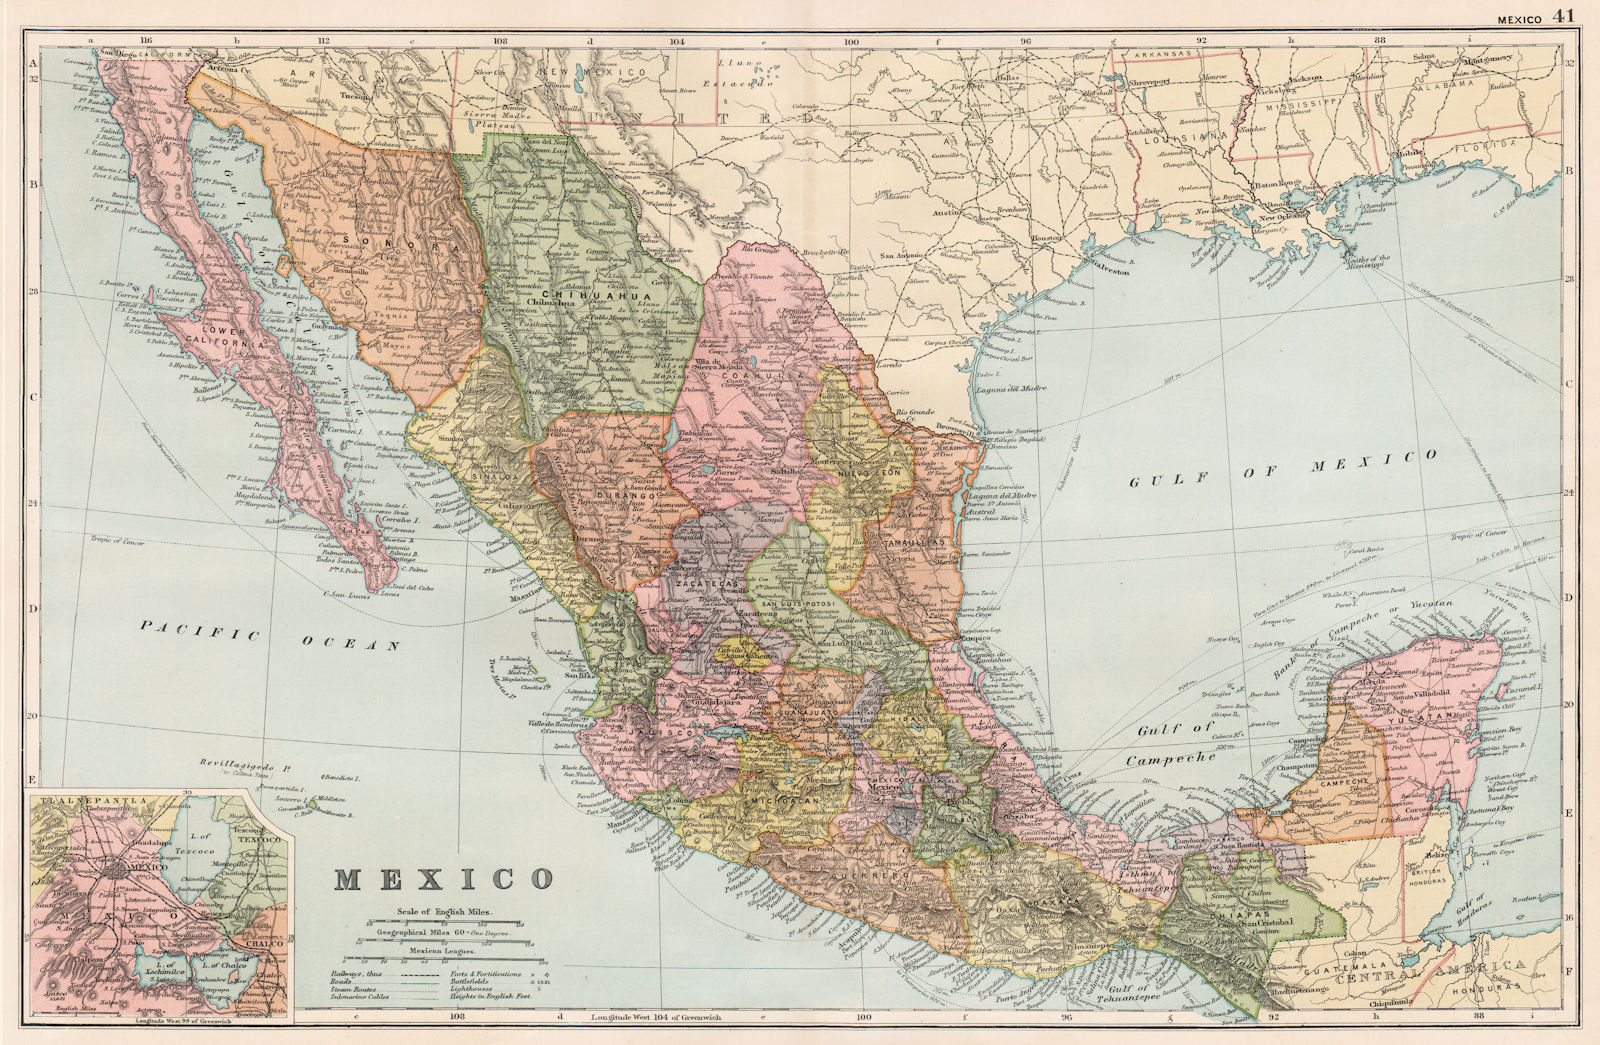 MEXICO. Shows states. Inset environs of Mexico City. BACON 1893 old map